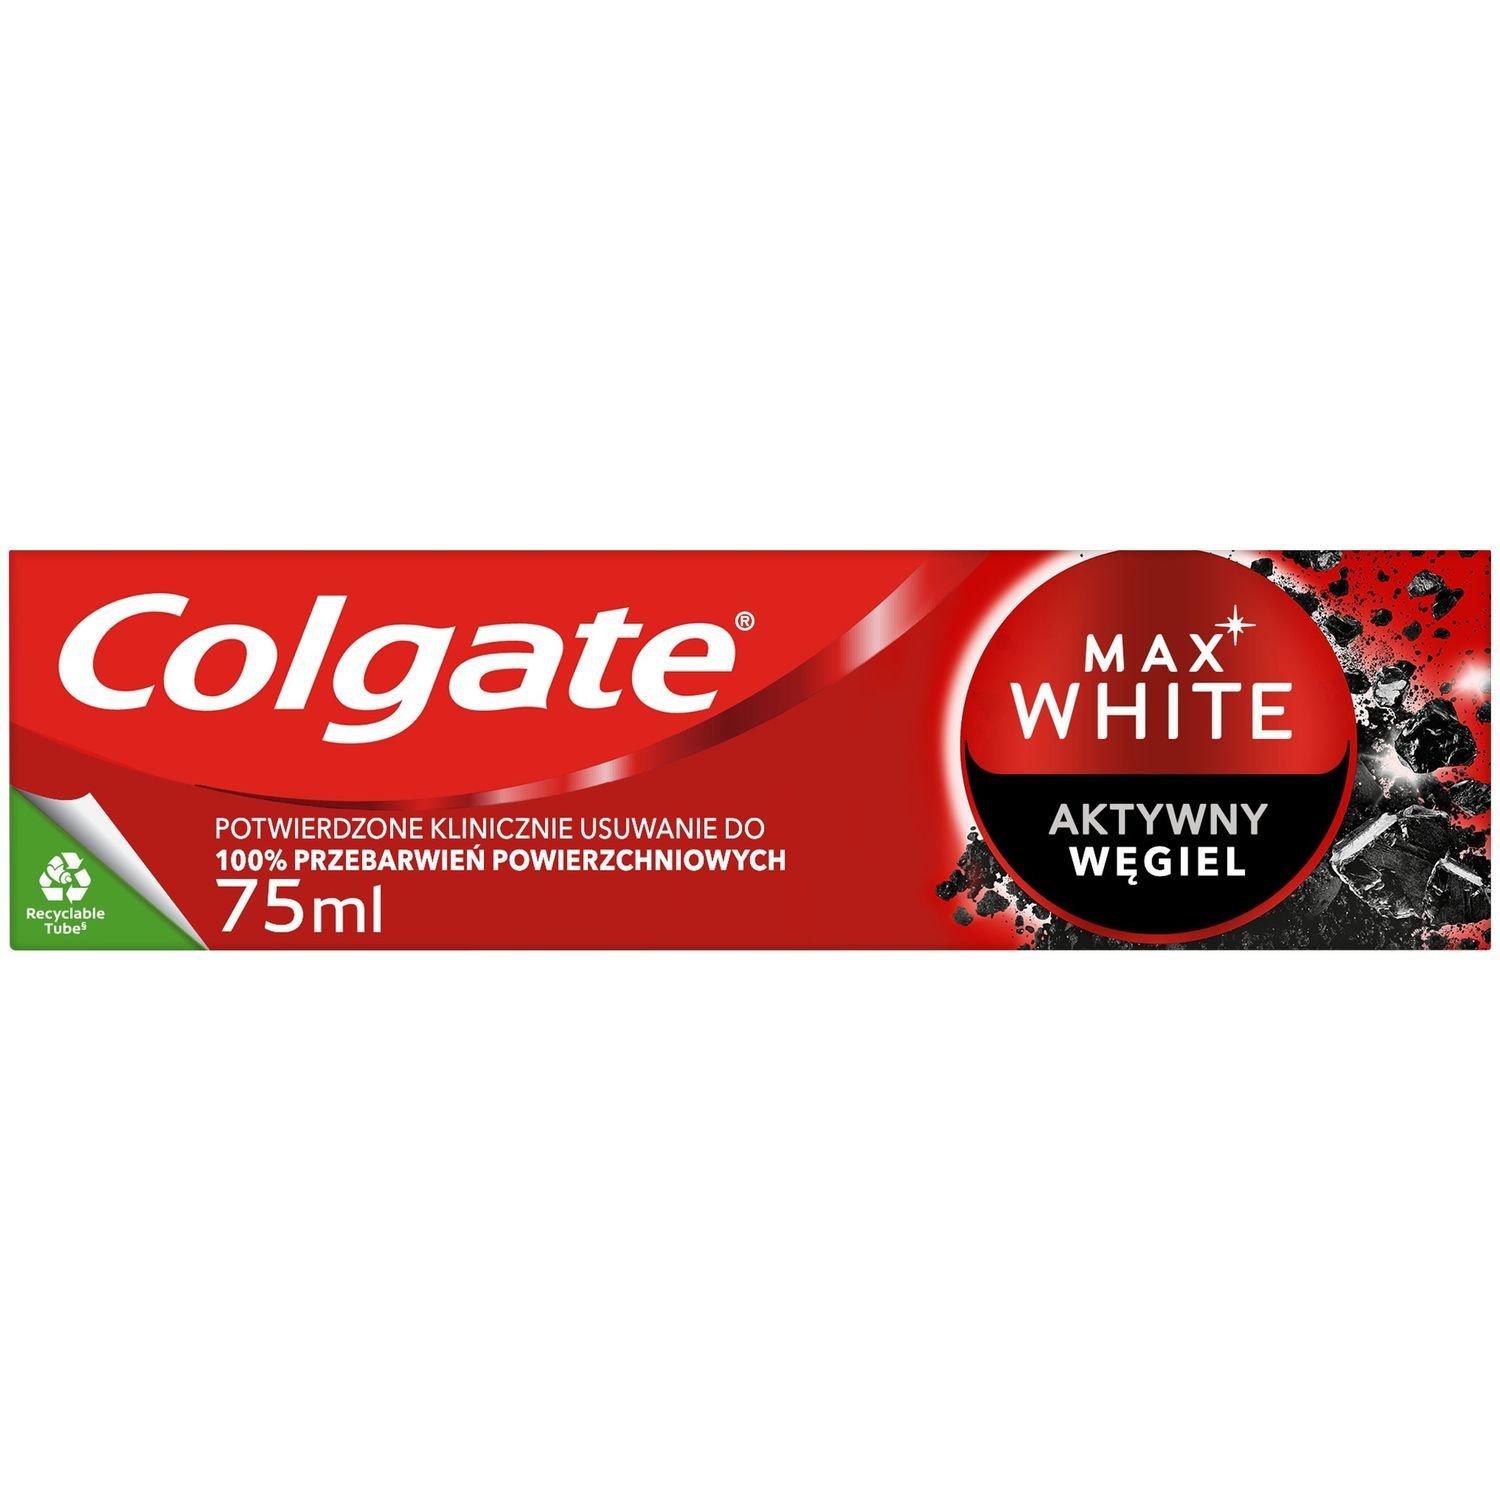 Зубная паста Colgate Max White Activated Charcoal 75 мл - фото 5